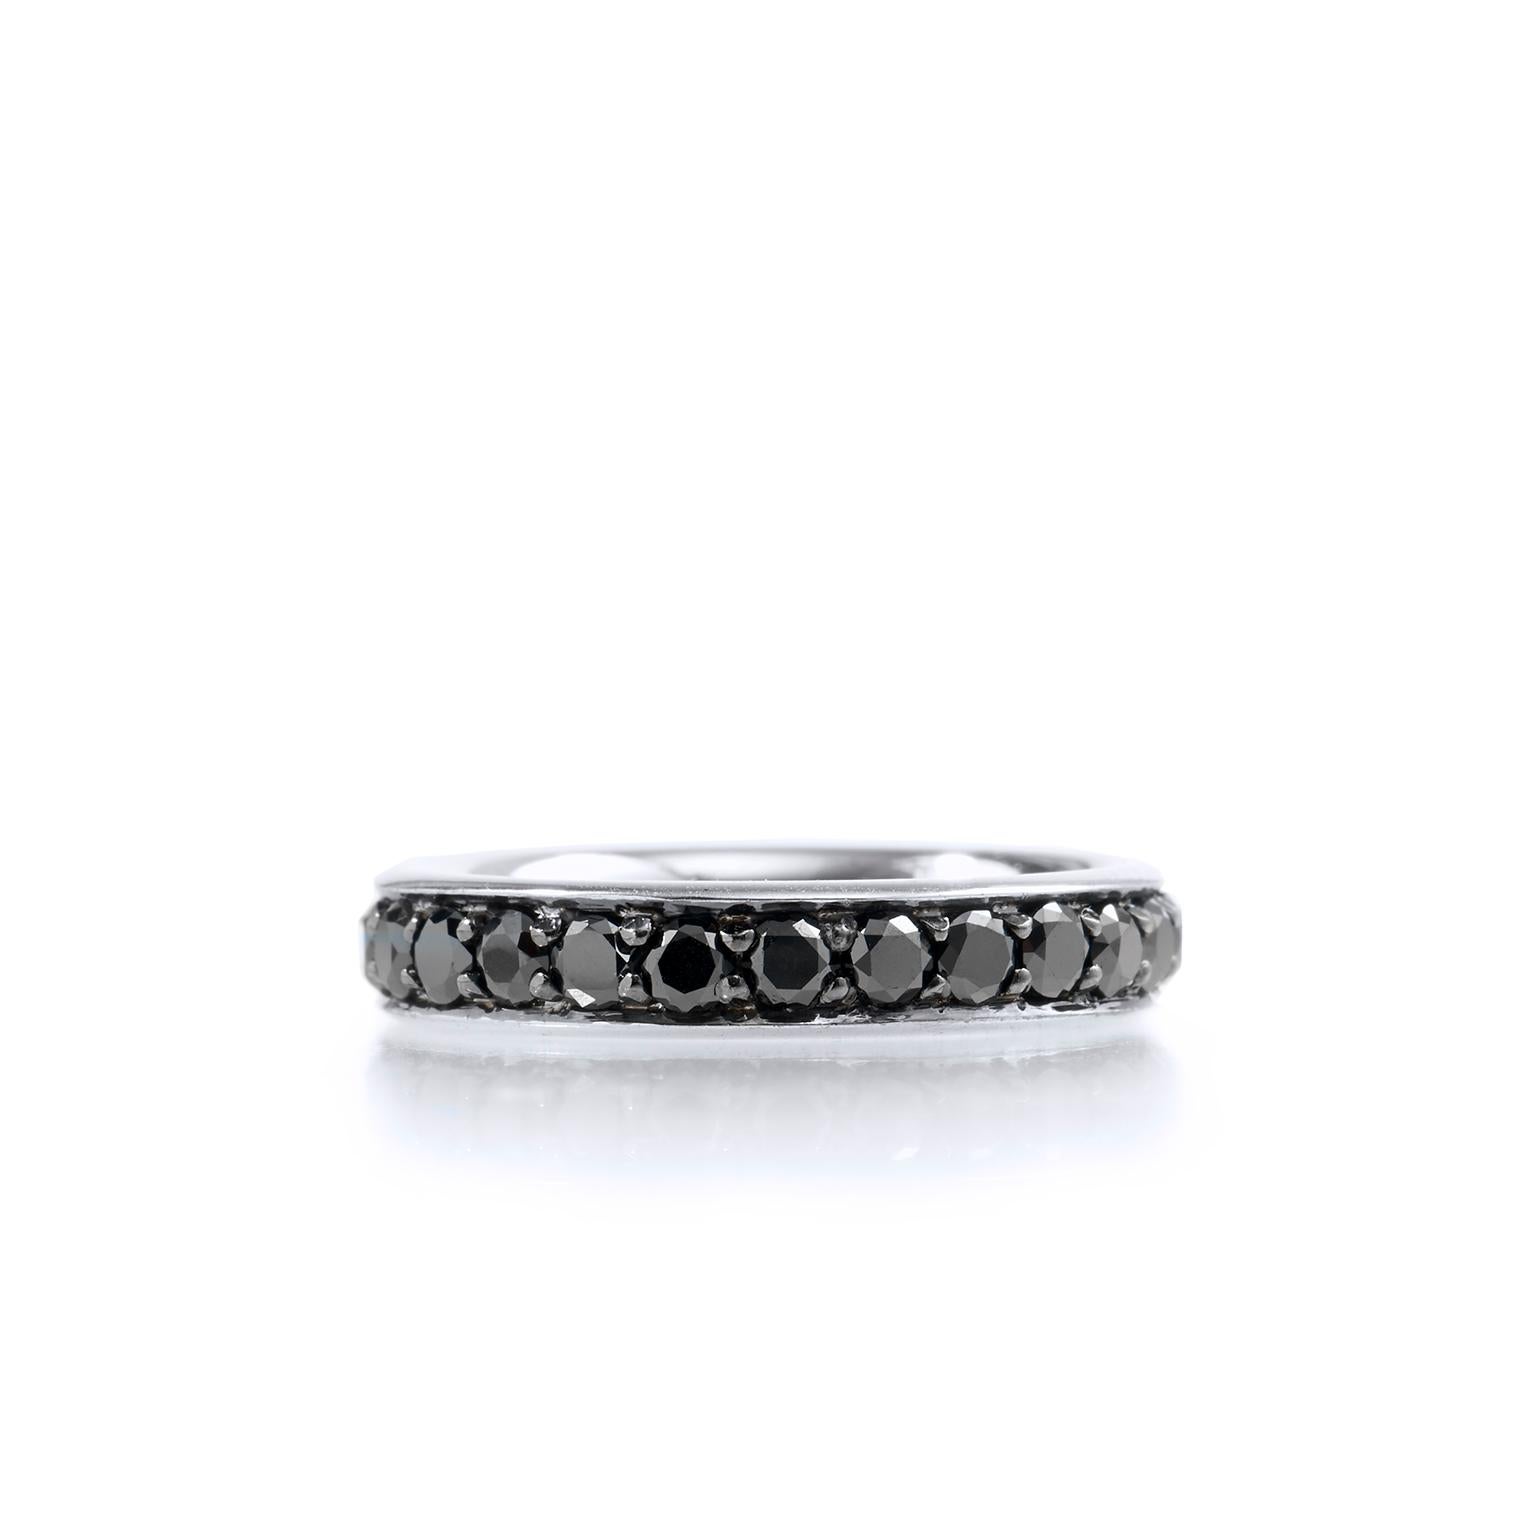 H&H 1.65 Carat Black Diamond Band Ring

18 karat white palladium cinctures 1.65 carat of pave-set black diamonds in this handmade band ring. 
Affixed to a 4 millimeter 18 karat palladium, this band ring has a modern edge and appeal. 